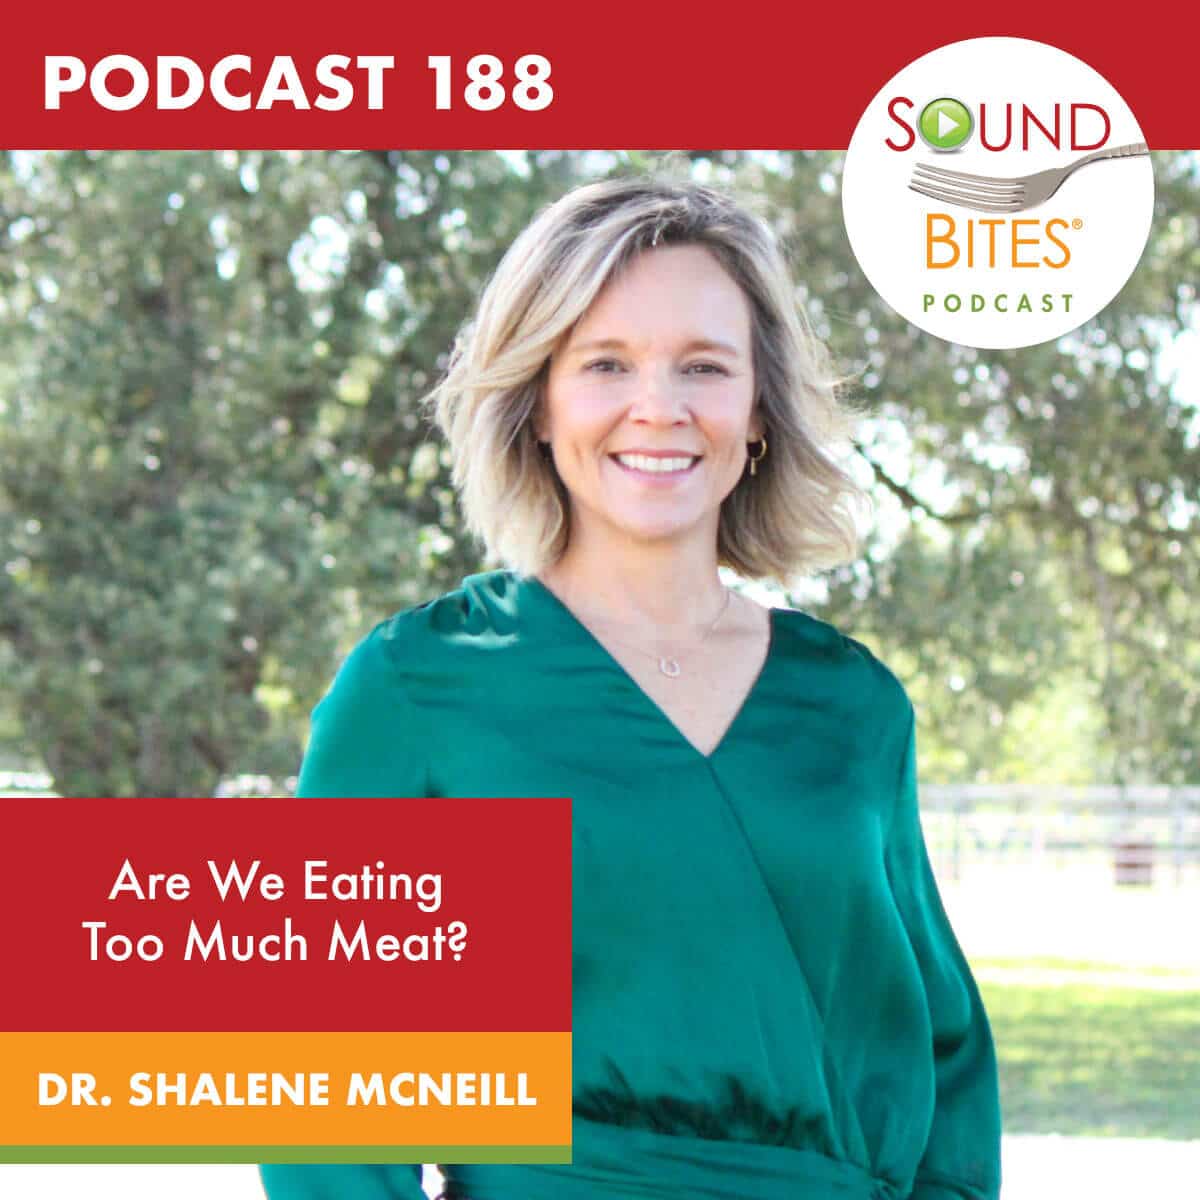 Sound Bites Podcast Episode 188 Are We Eating Too Much Meat? – Dr. Shalene McNeill CEU Test Questions